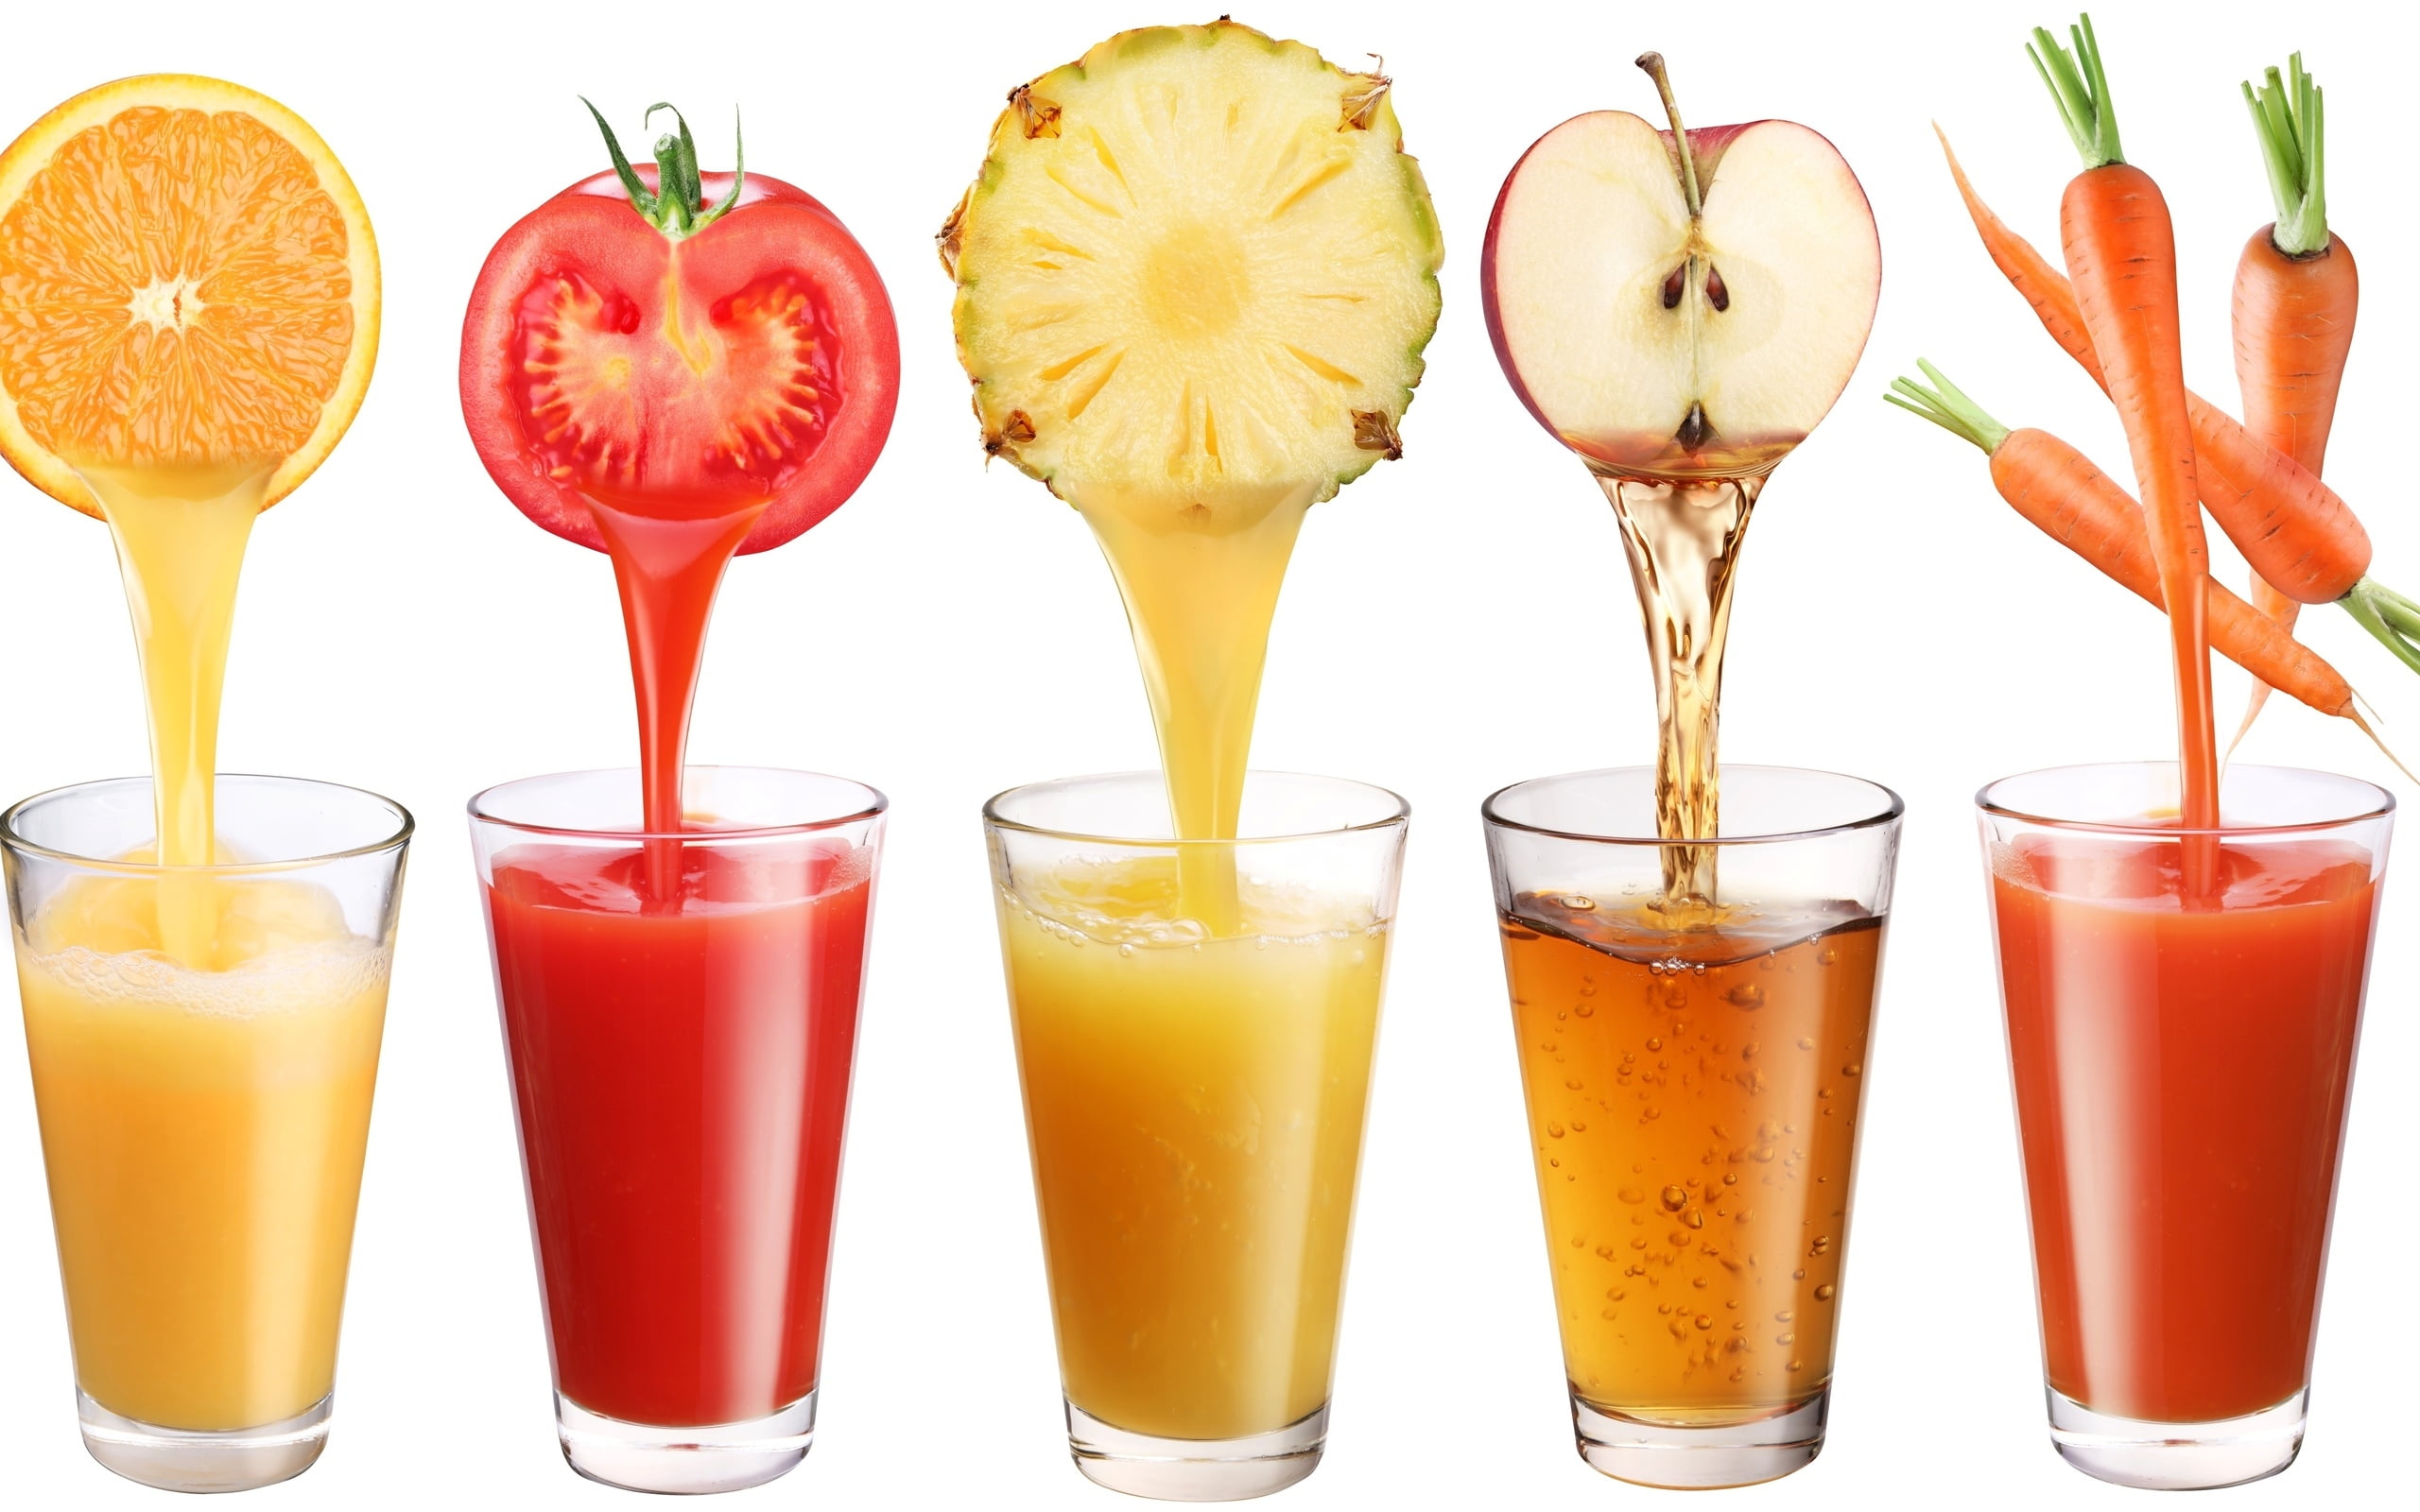 variety of fruits and vegetables juice in glasses